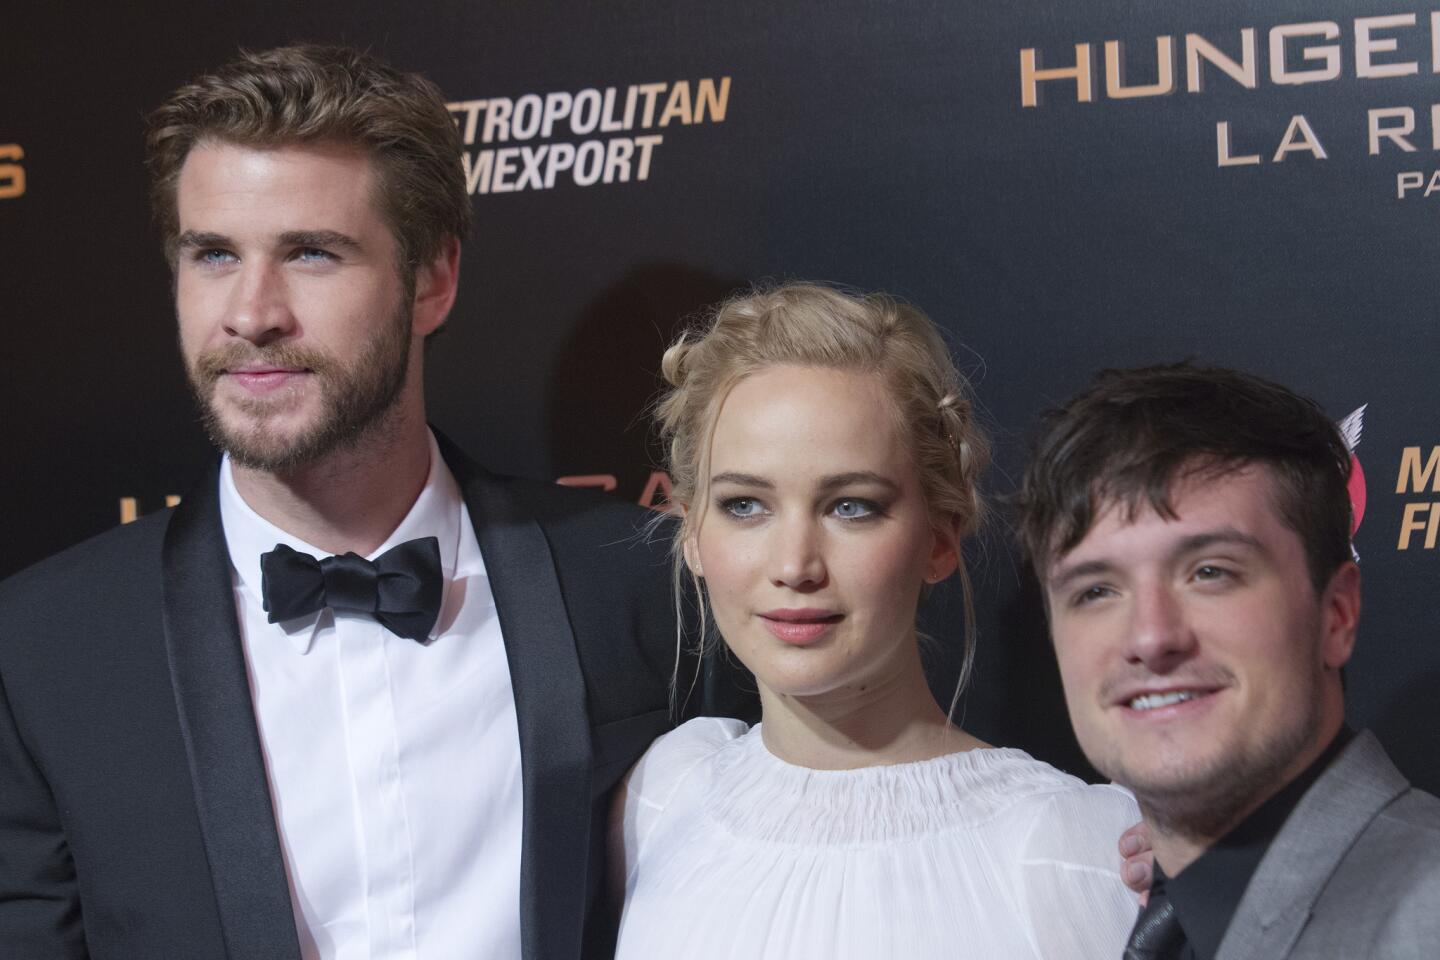 Mockingjay and feminism: The new Hunger Games movie envisions a future  where women run the world.